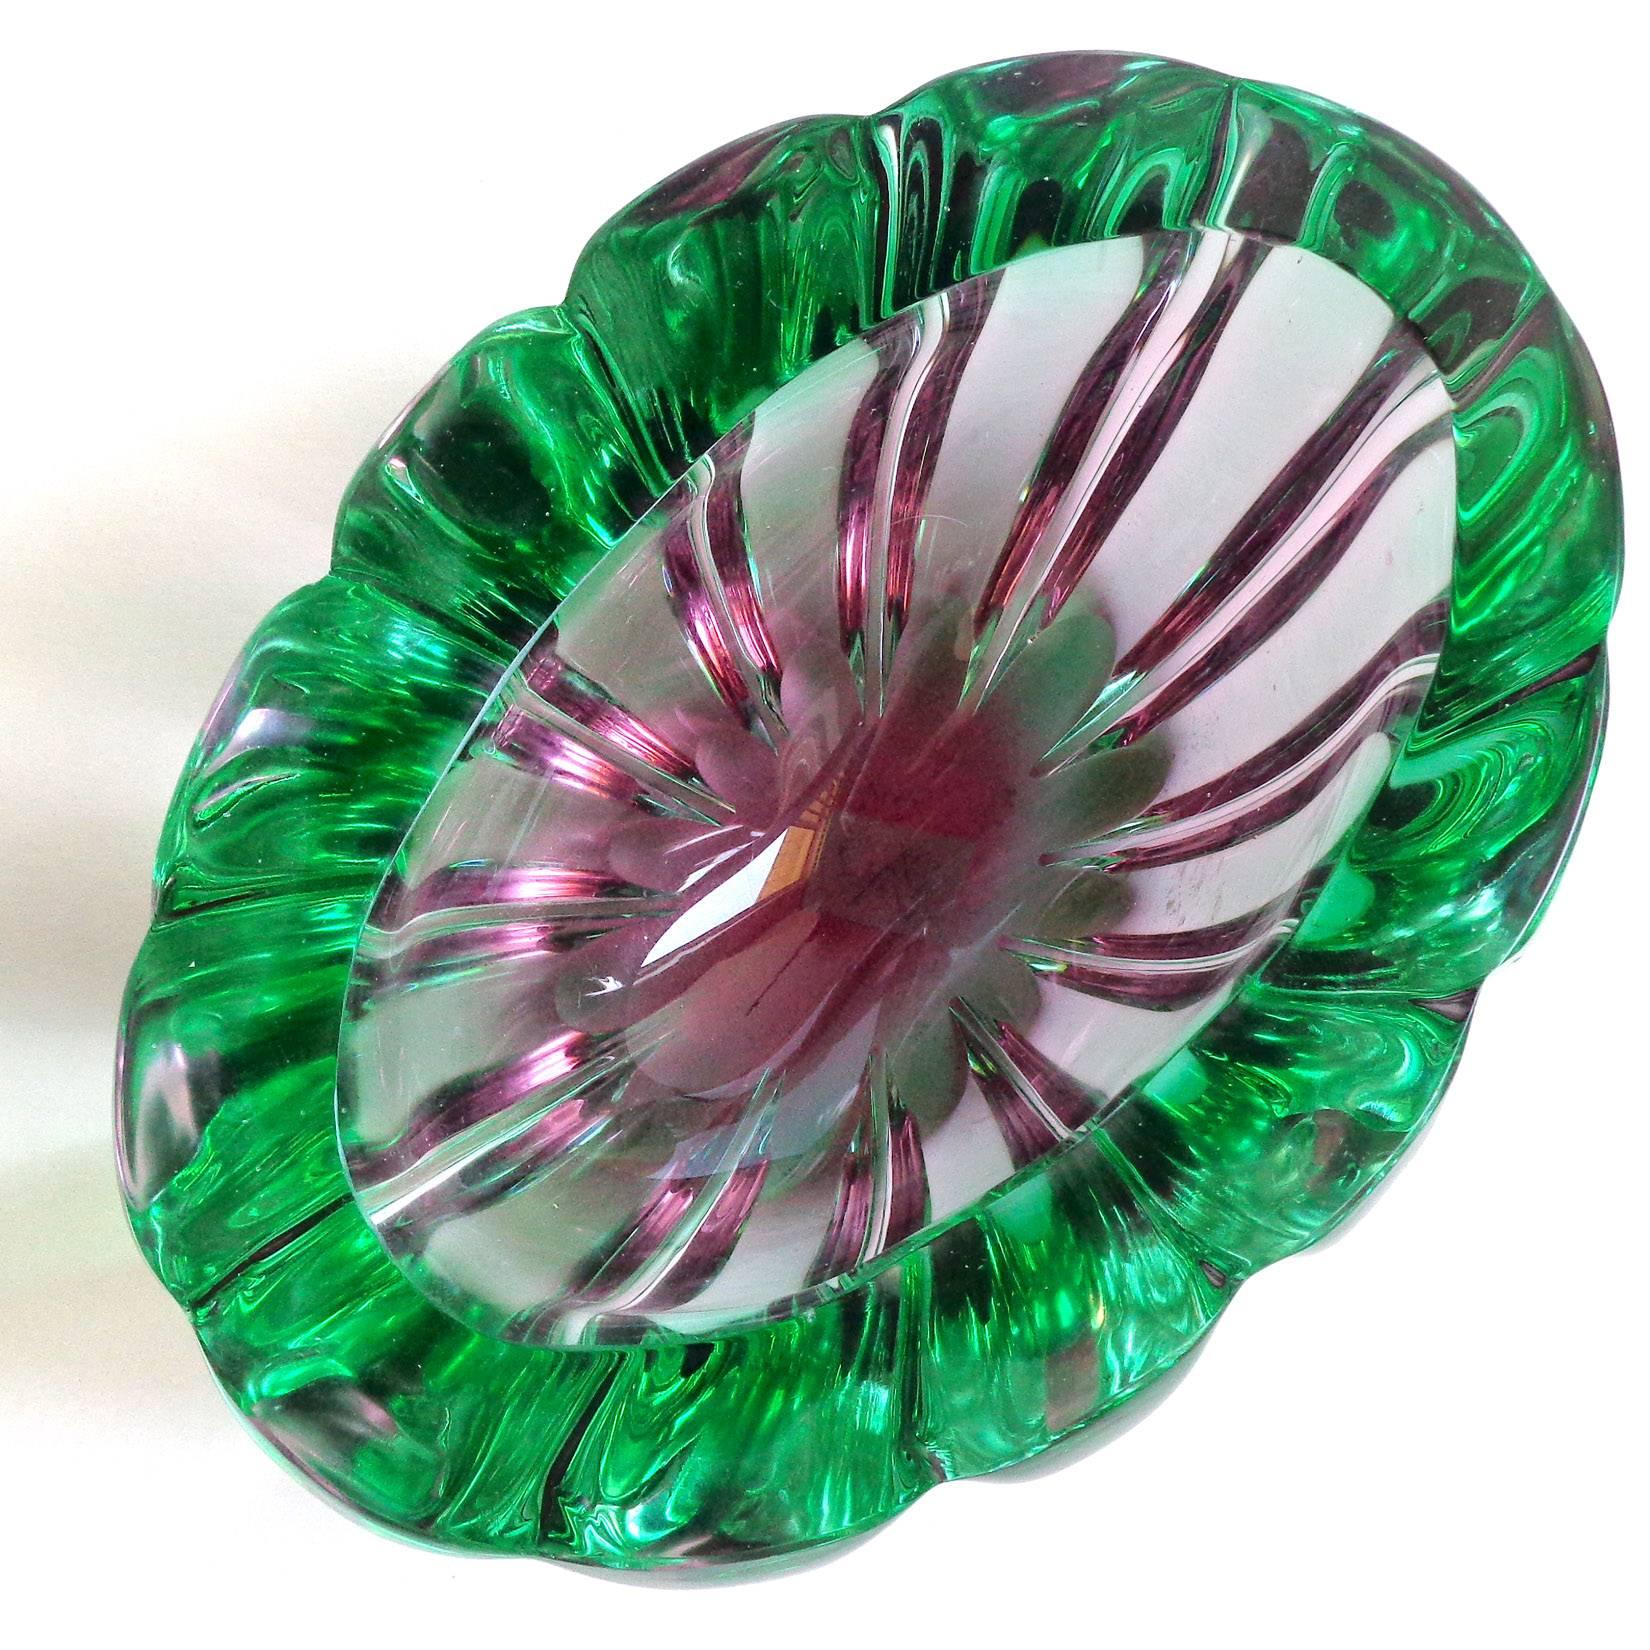 Free shipping worldwide! See details below description.

Beautiful Murano handblown Sommerso green over purple art glass flat cut rim, geode bowl. Created in the manner of Archimede Seguso and the Seguso Vetri D' Arte company. Would make a great